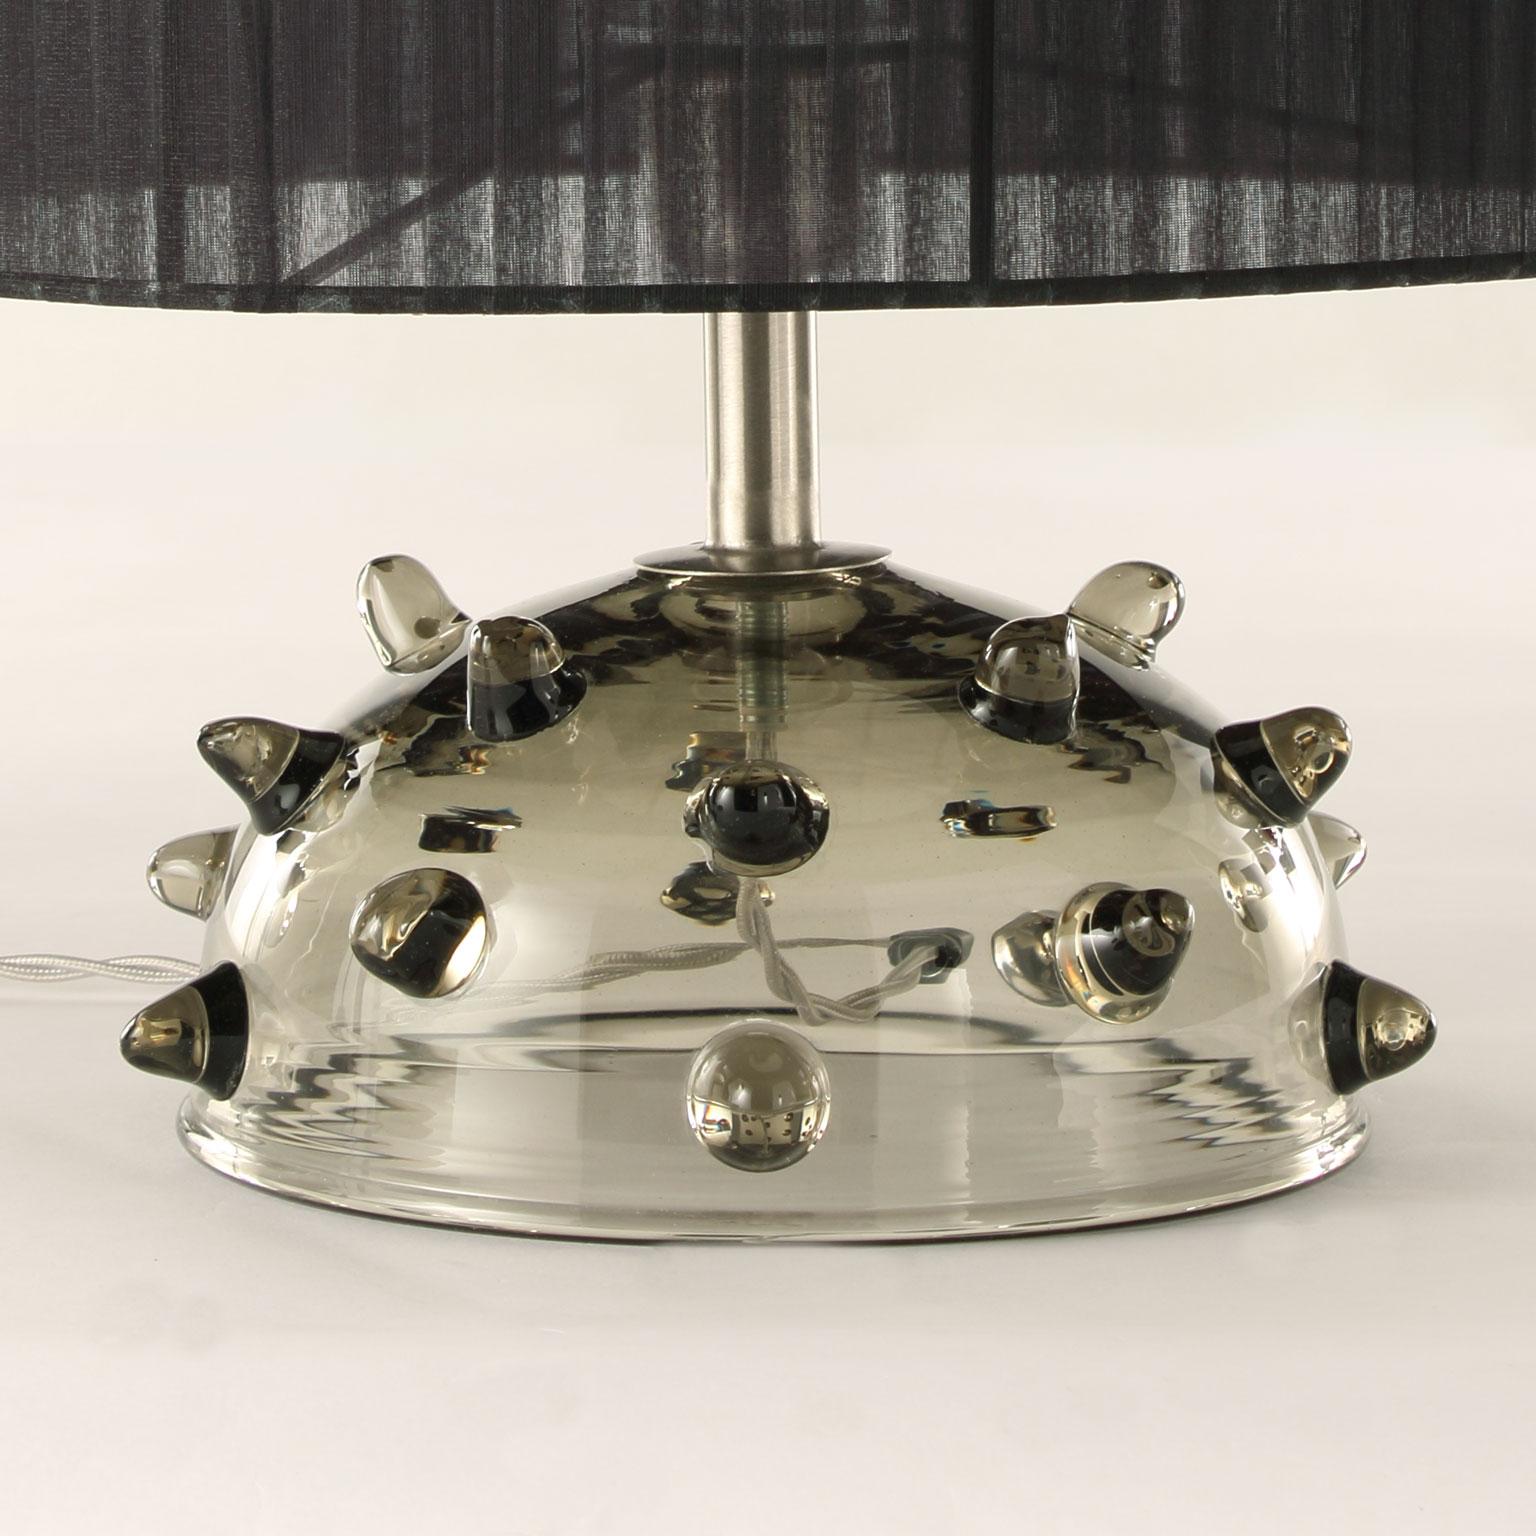 Table lamp in grey artistic glass with clear “bugne” (particular application in glass on the base), black organza handcrafted lampshade.

Size: 35 length x 41 height

The handcrafted soul of our lighting products is reinvented every time we start a